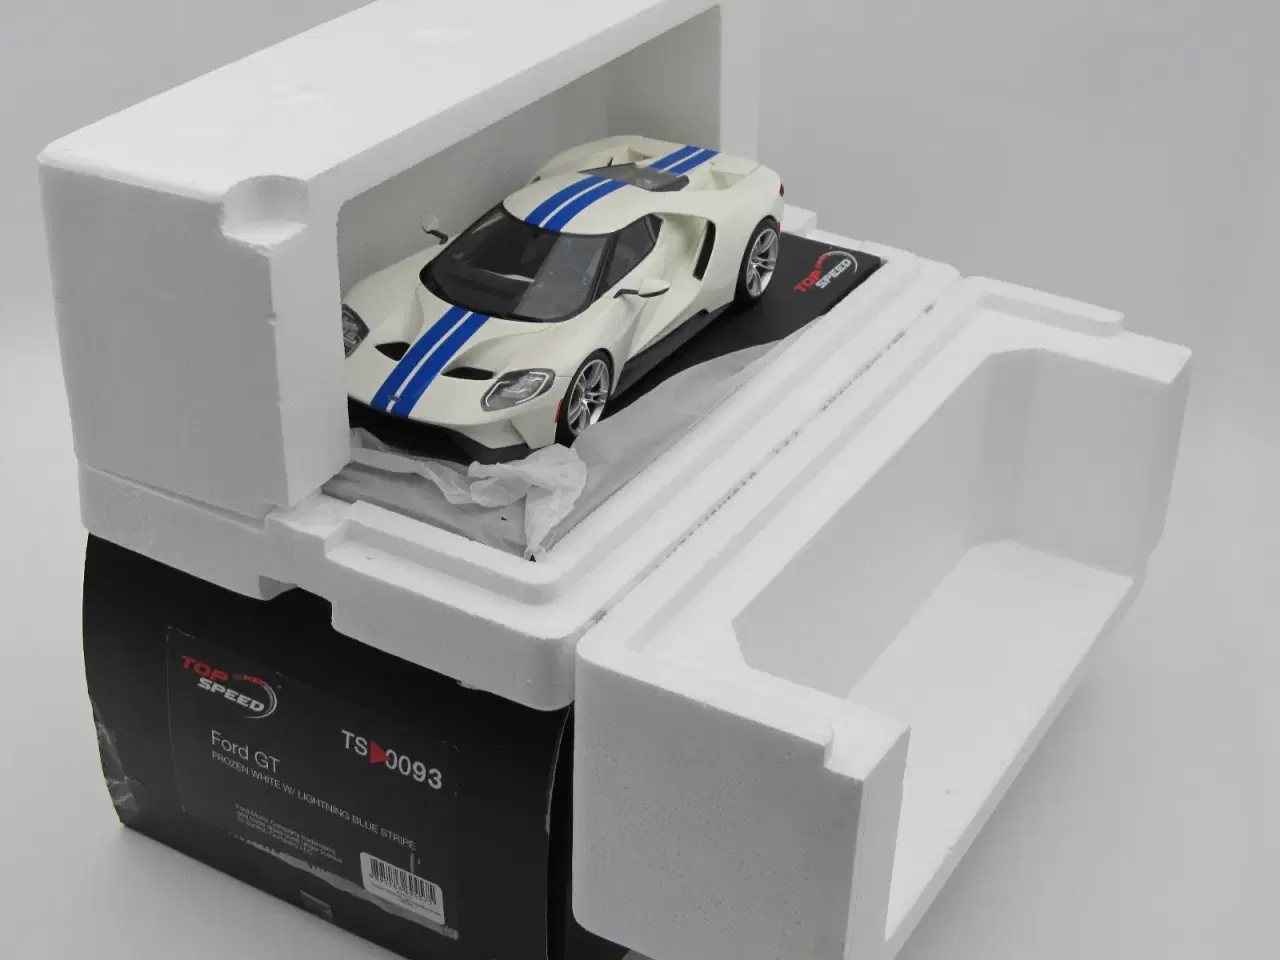 Billede 10 - 2016 Ford GT Shelby Limited Edition - 1:18